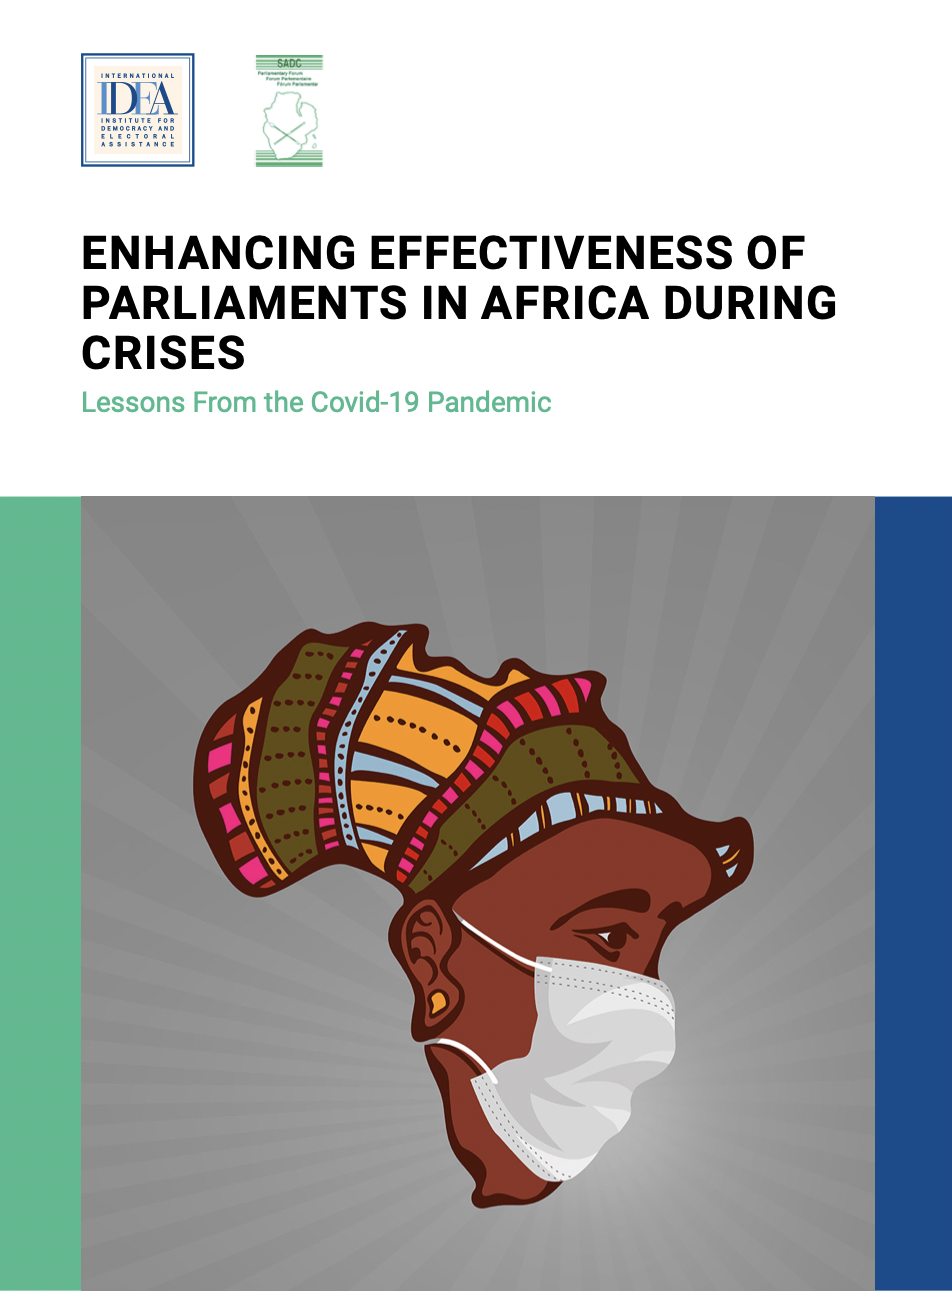 Enhancing Effectiveness of Parliaments in Africa During Crises